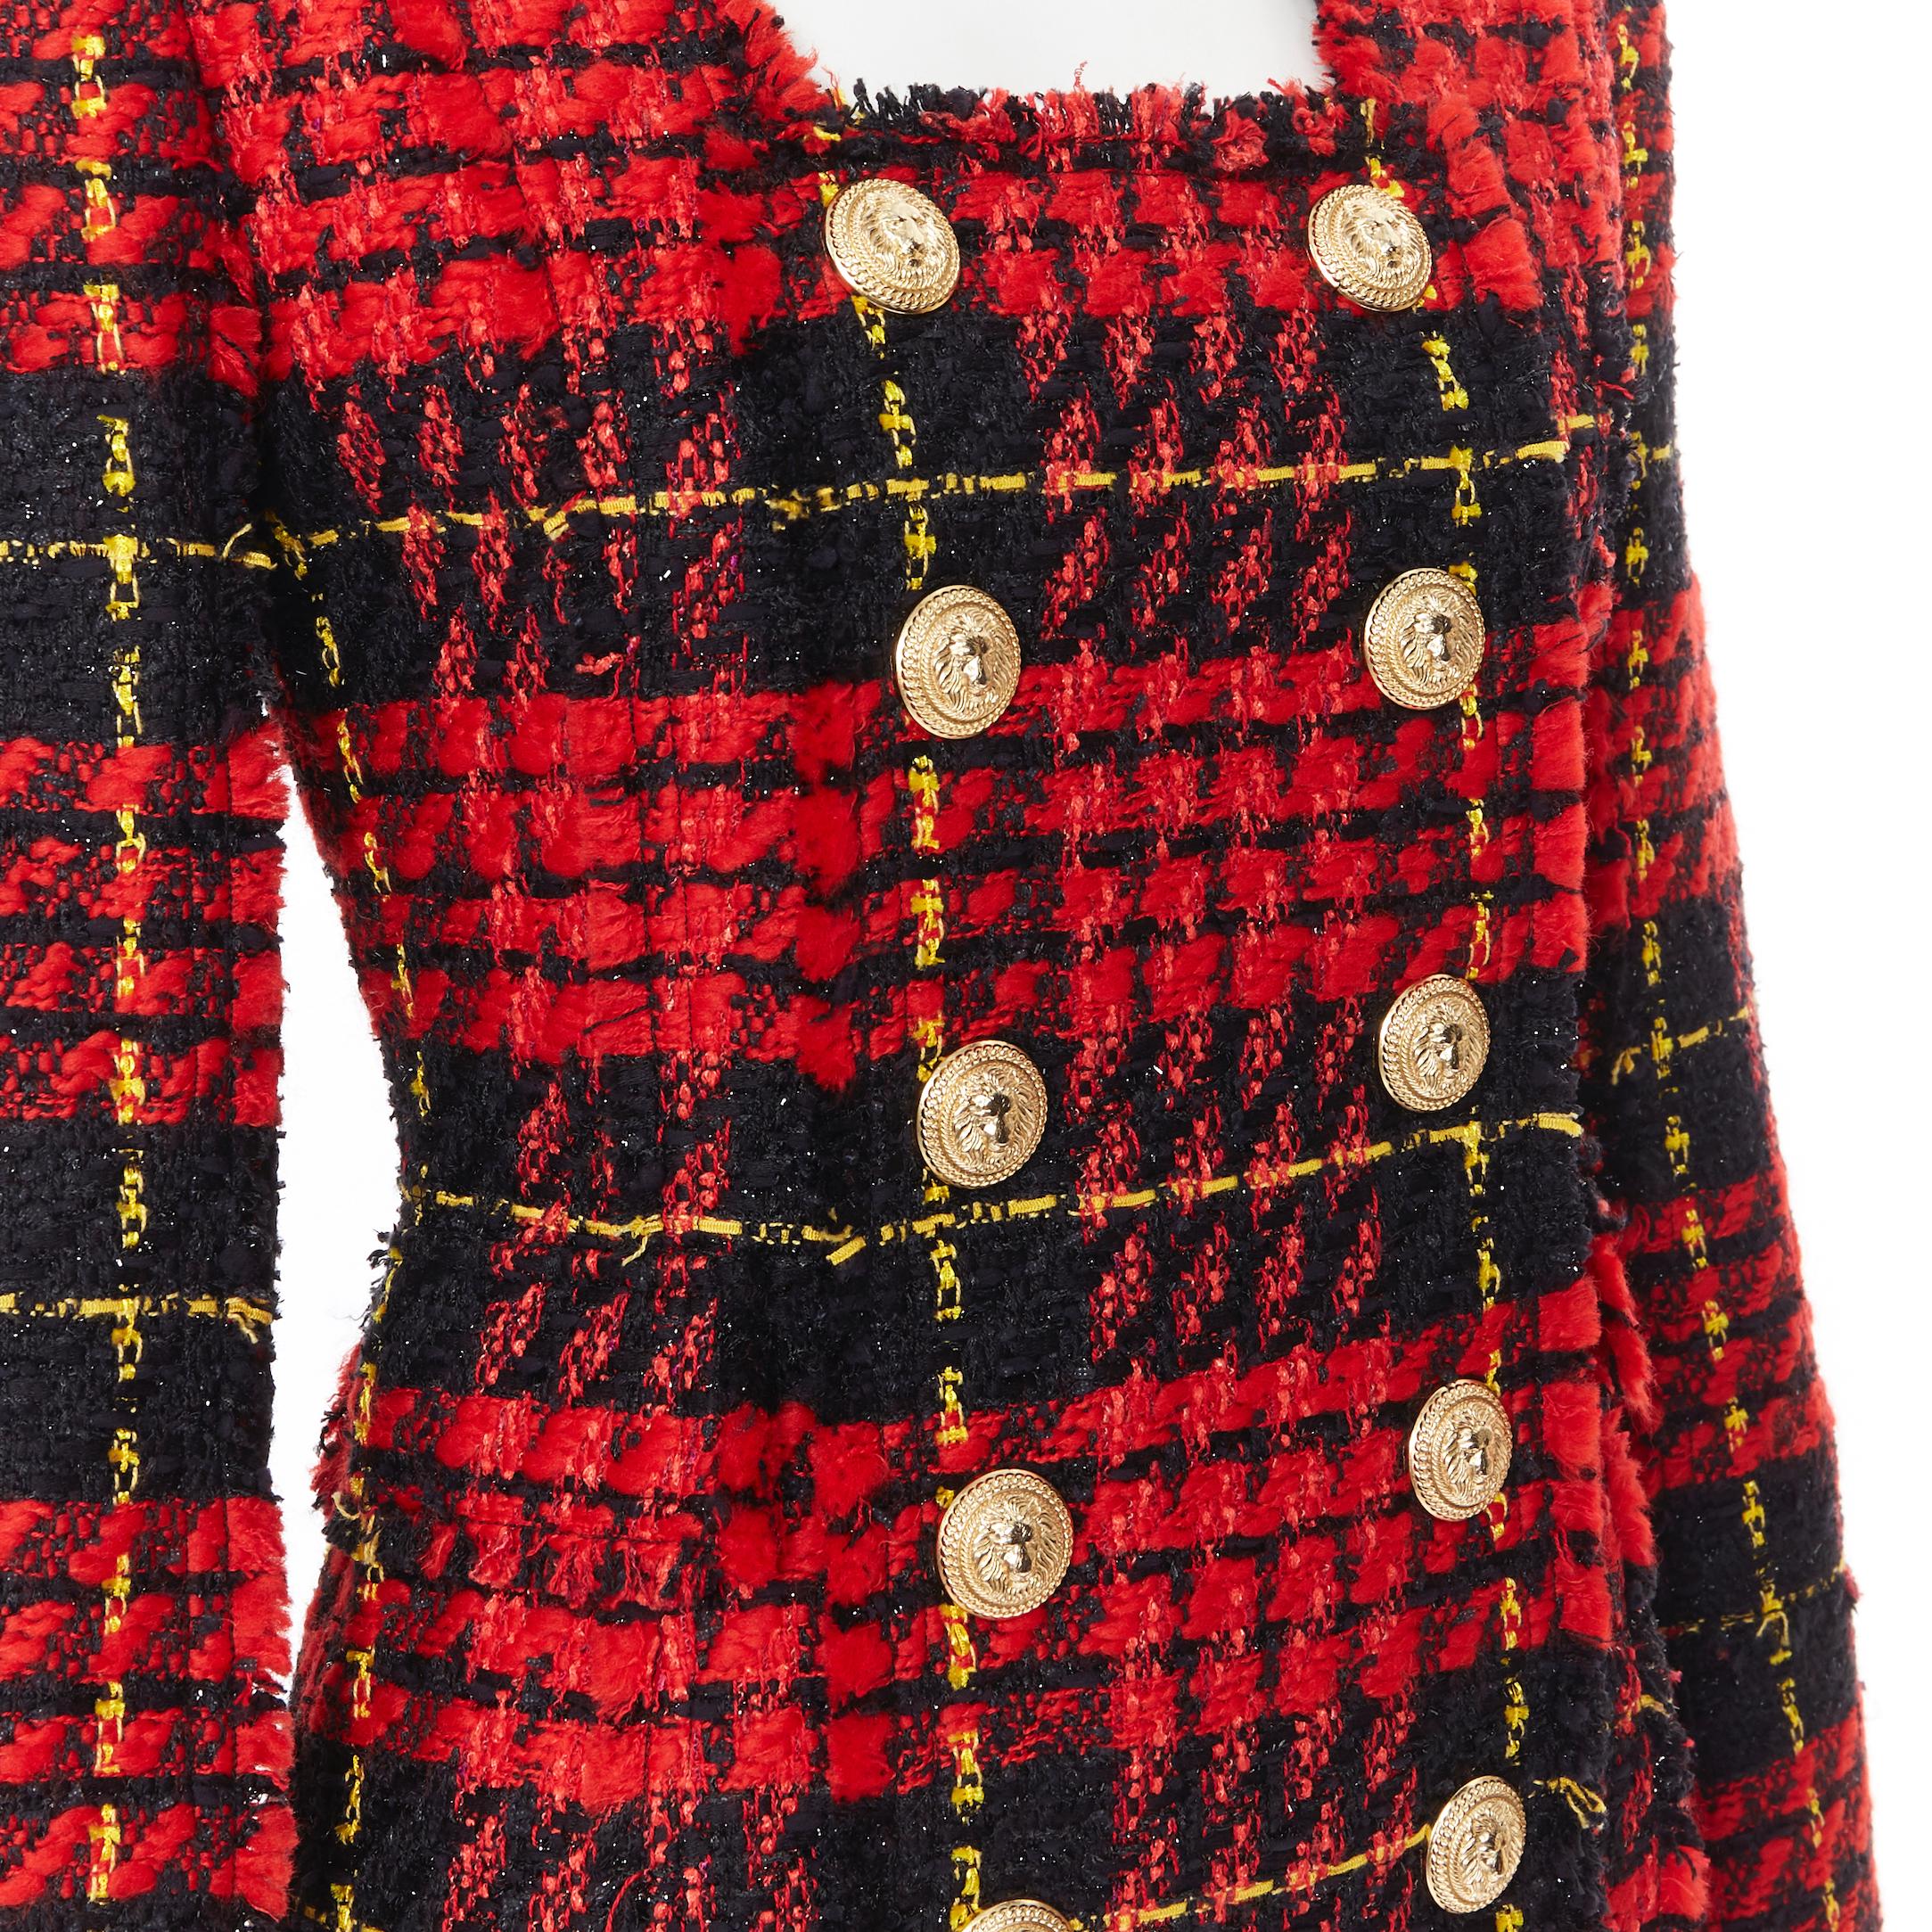 new BALMAIN Runway red black checked tweed double breasted military dress FR34 
Brand: Balmain
Designer: Olivier Rousteing
Model Name / Style: Tweed dress
Material: Polyester blend
Color: Red
Pattern: Check
Closure: Zip
Extra Detail: BALMAIN style